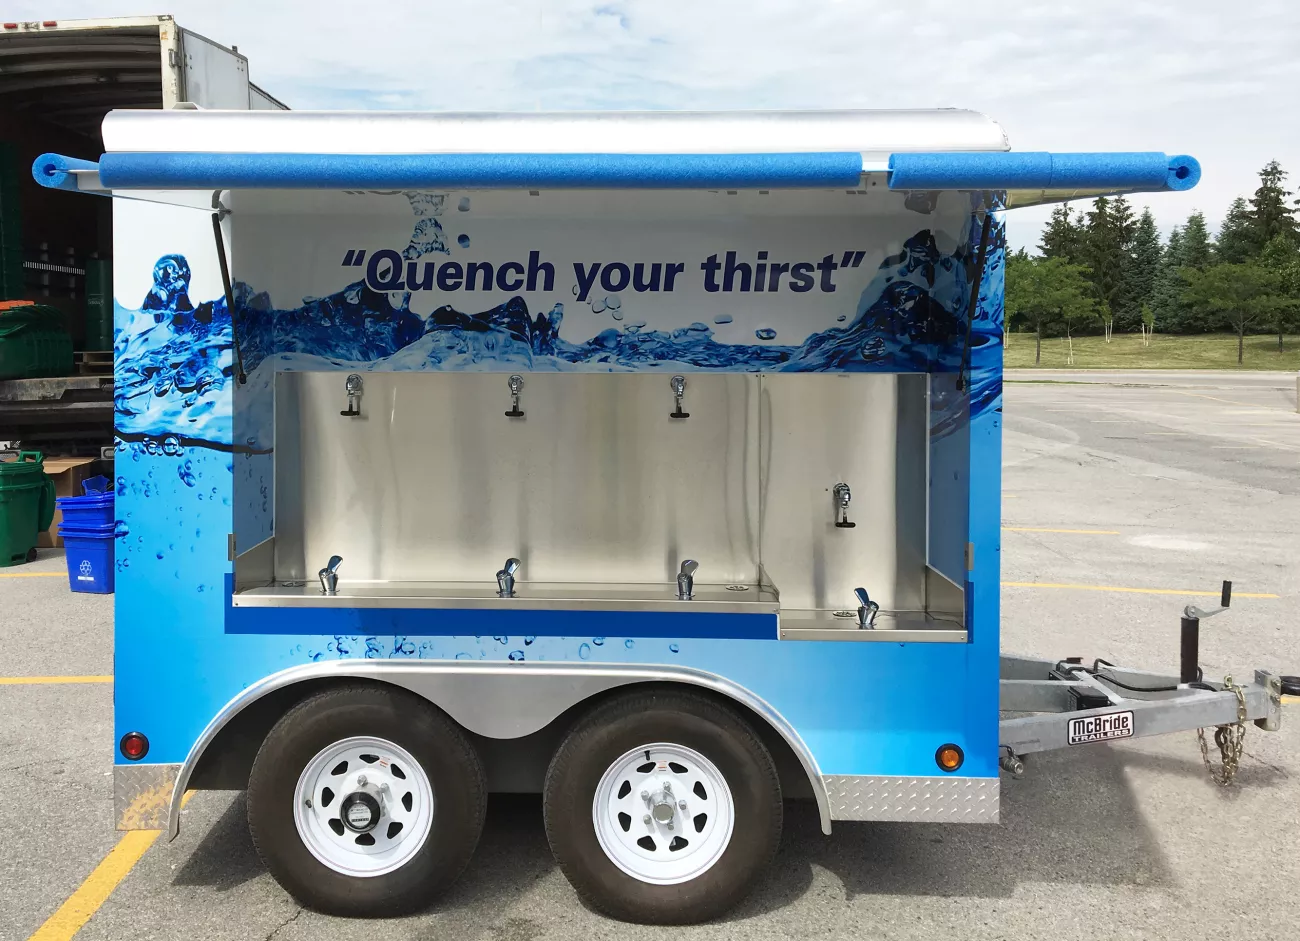 A picture of the mobile water cooler.